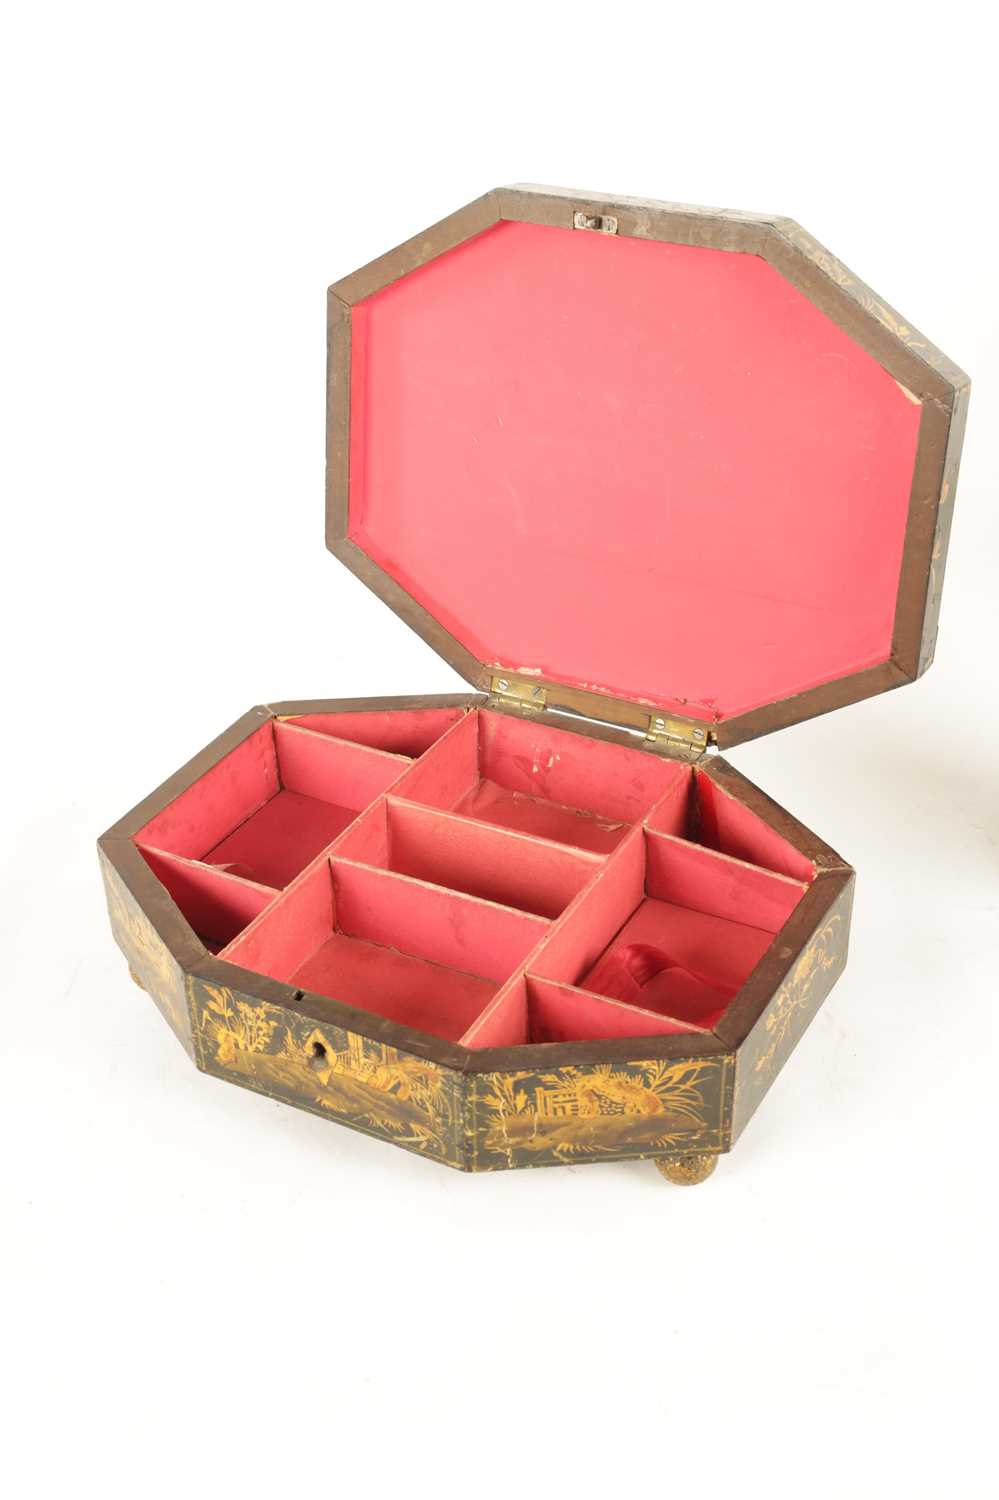 A REGENCY CHINOISERIE DECORATED LACQUERED SEWING BOX - Image 7 of 10